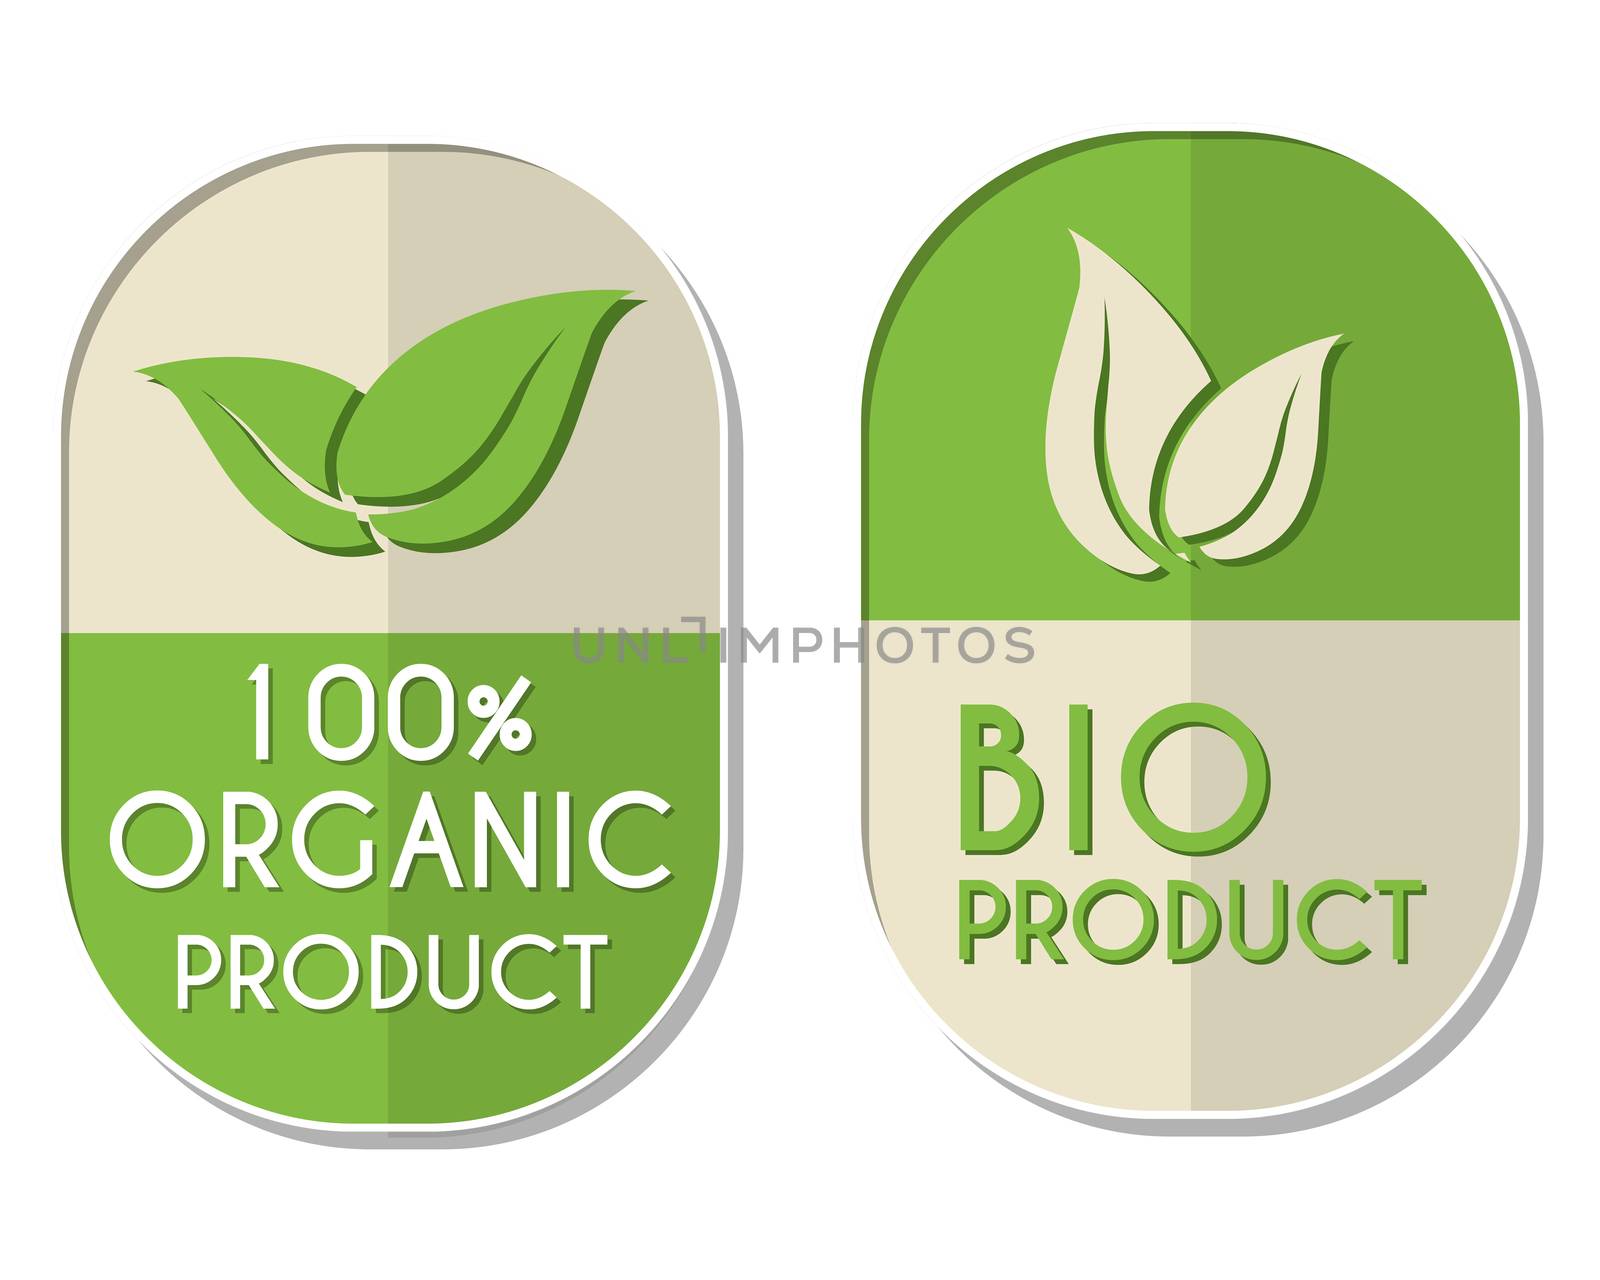 100 percent organic and bio product with leaf signs banners, two elliptic flat design labels with text and symbol, business eco concept